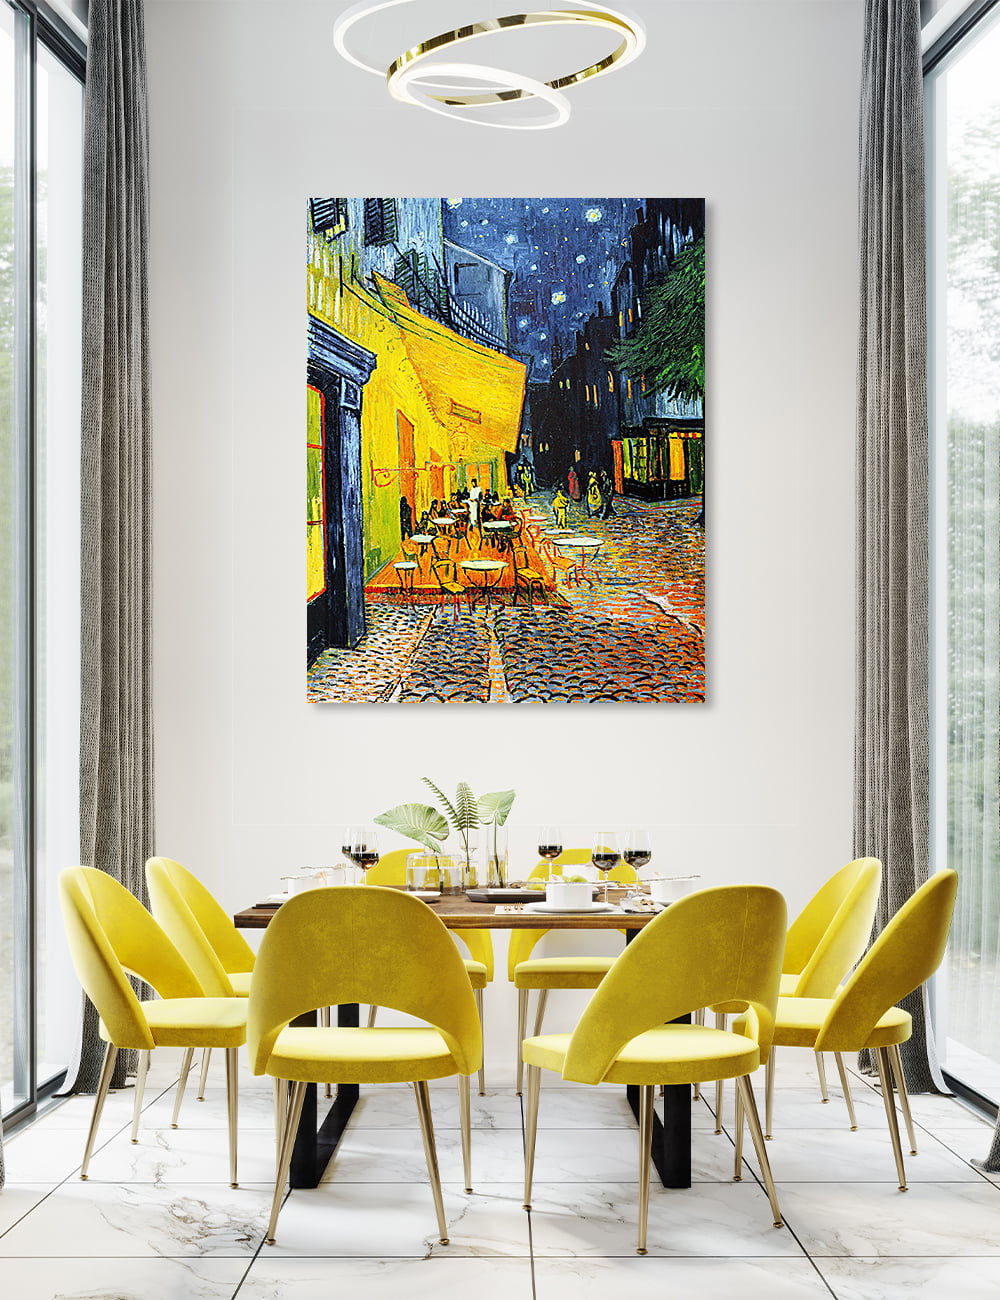 DECORARTS Cafe Terrace At Night by Vincent Van Gogh Art Reproduction. Giclee  Prints Acid Free Cotton Canvas Wall Art for Home Decor W 32